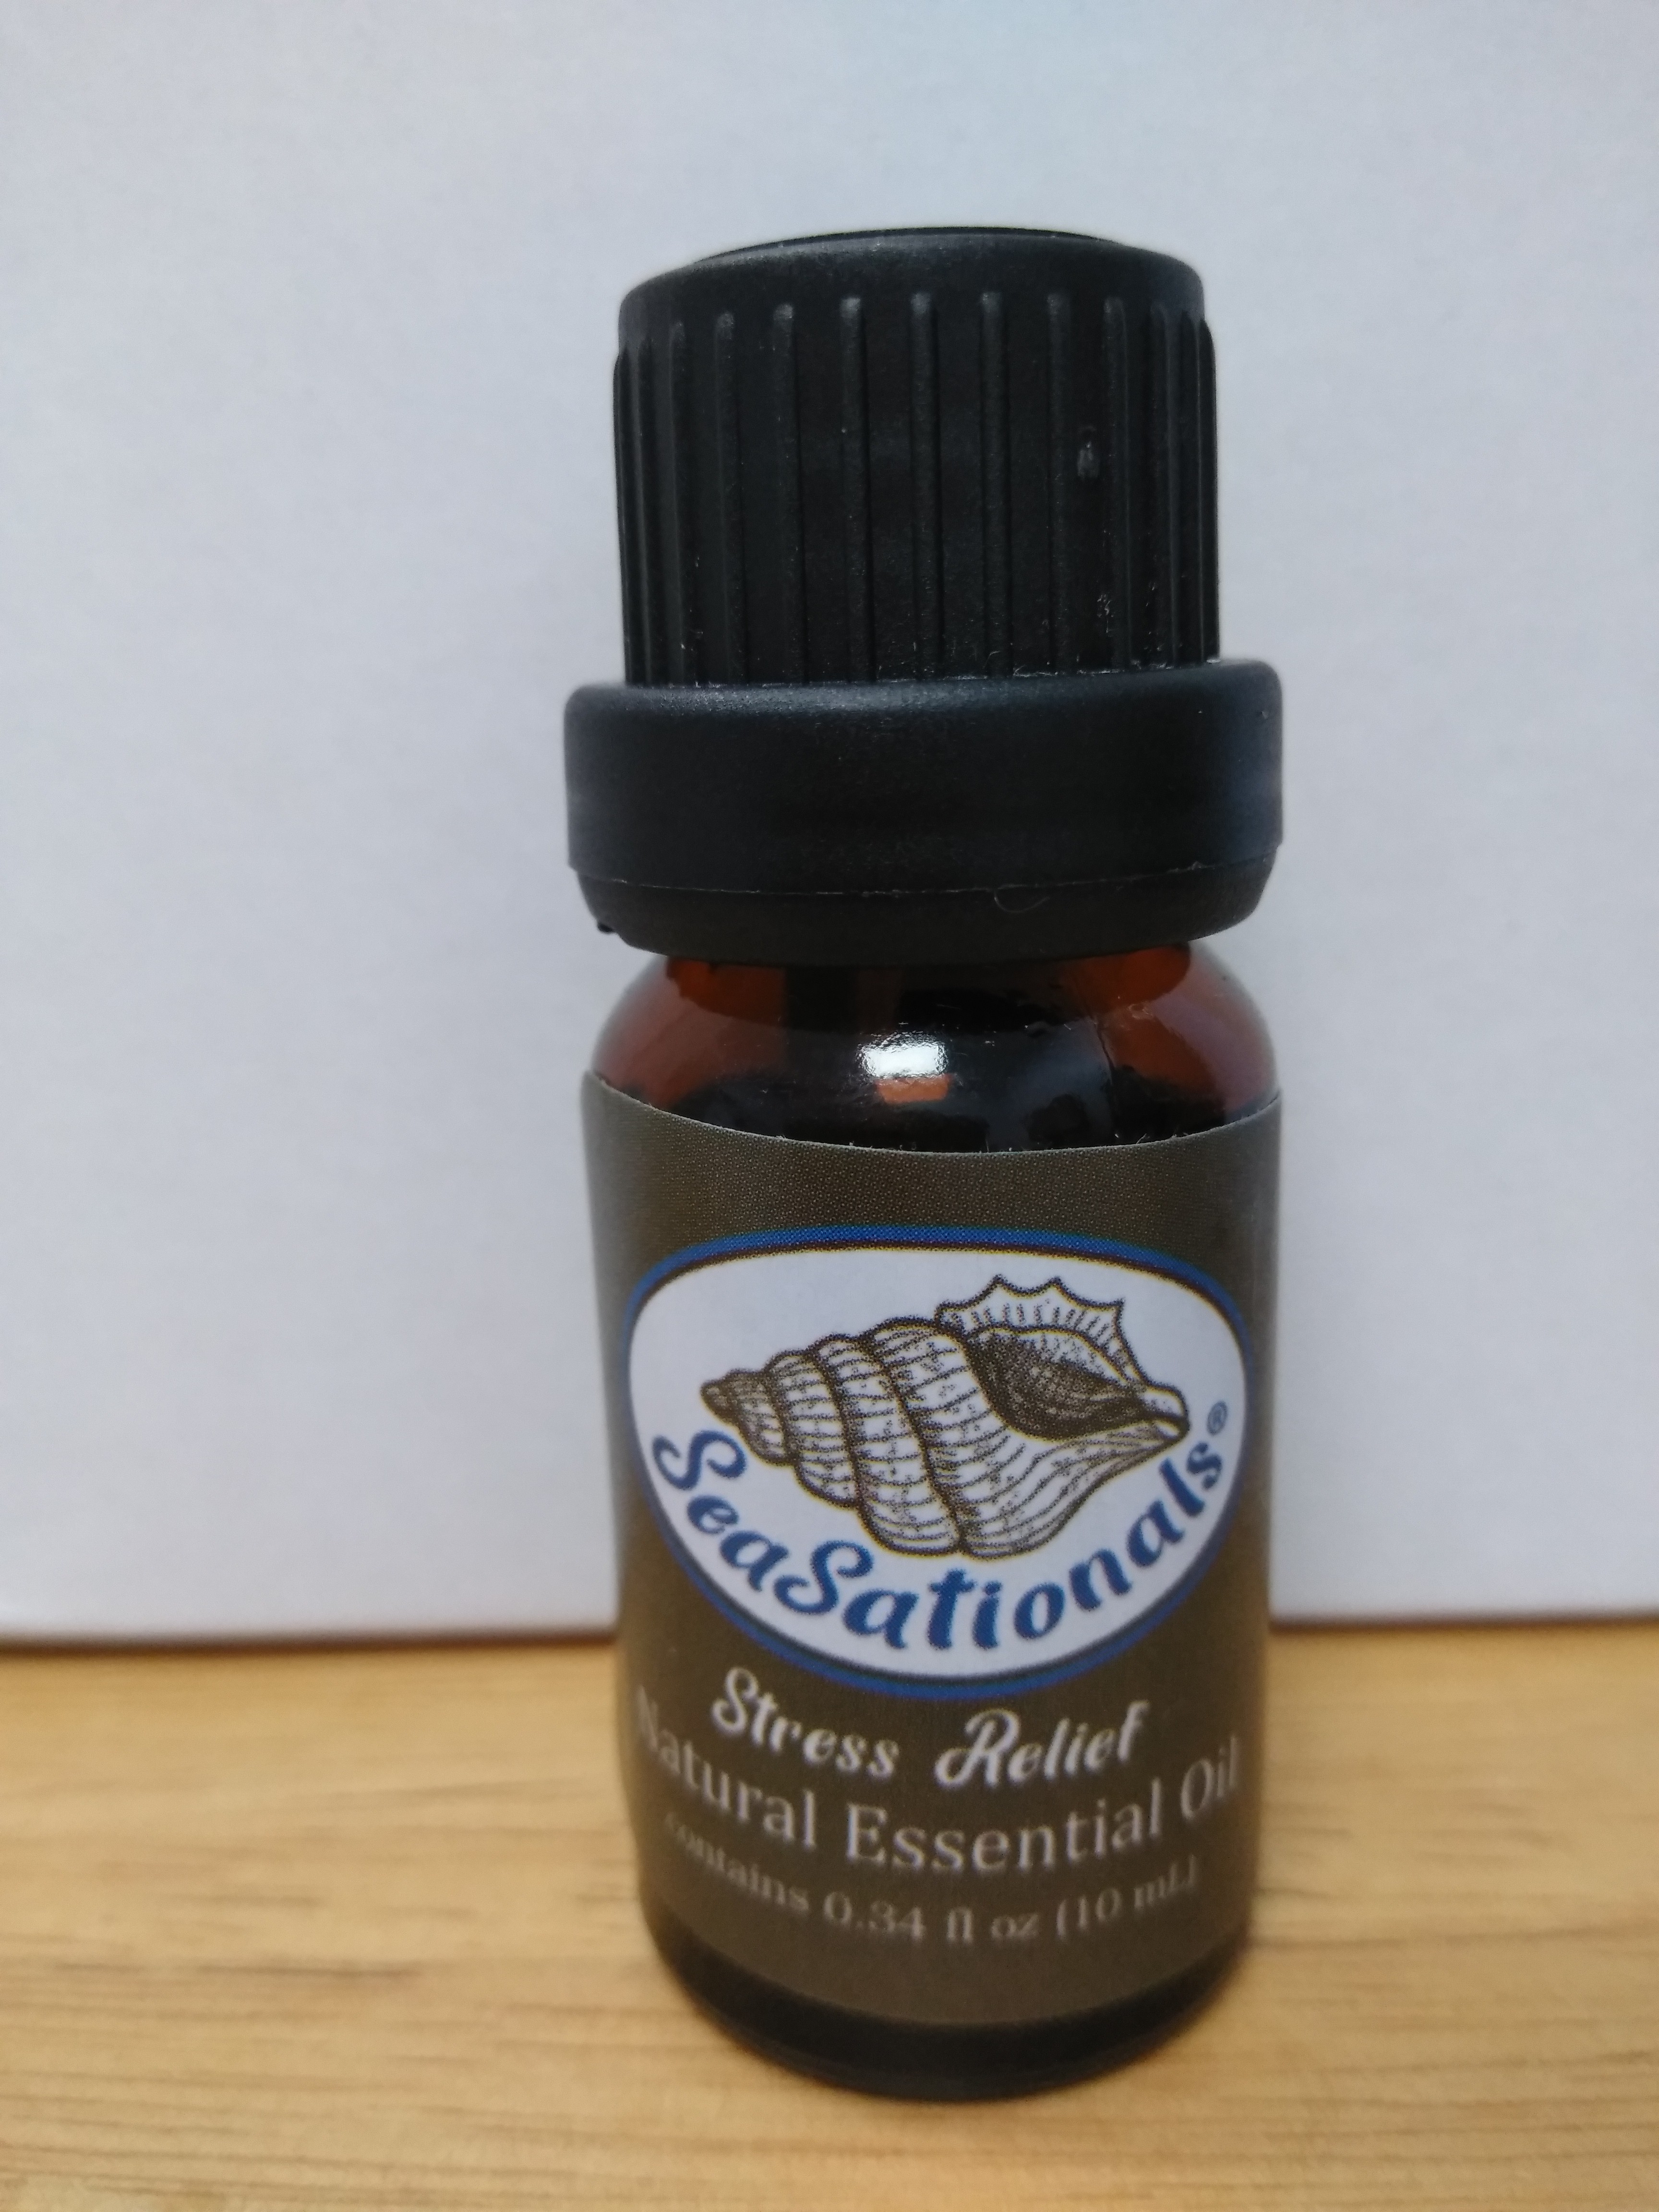 SeaSationals Stress Relief Natural Essential Oil